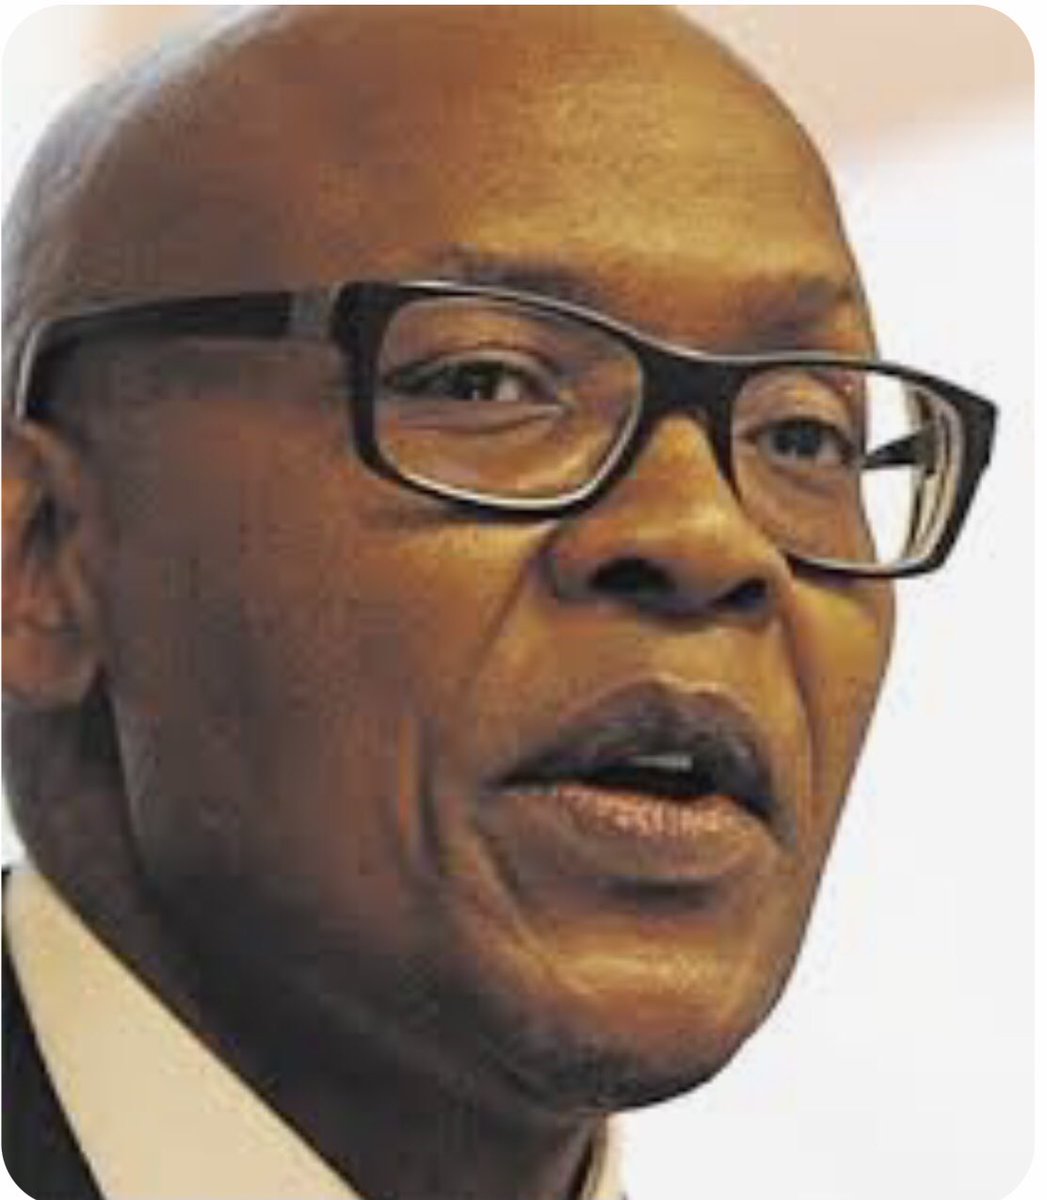 Meet one of the architects of state capture and corruption and one of the closest allies of the evil and corrupt Gupta family, MZWANELE MANYI. Manyi was born 20 January 1964 in Medowlands, Soweto. In Manyi’s early working life he worked in the banking sector and a few other…